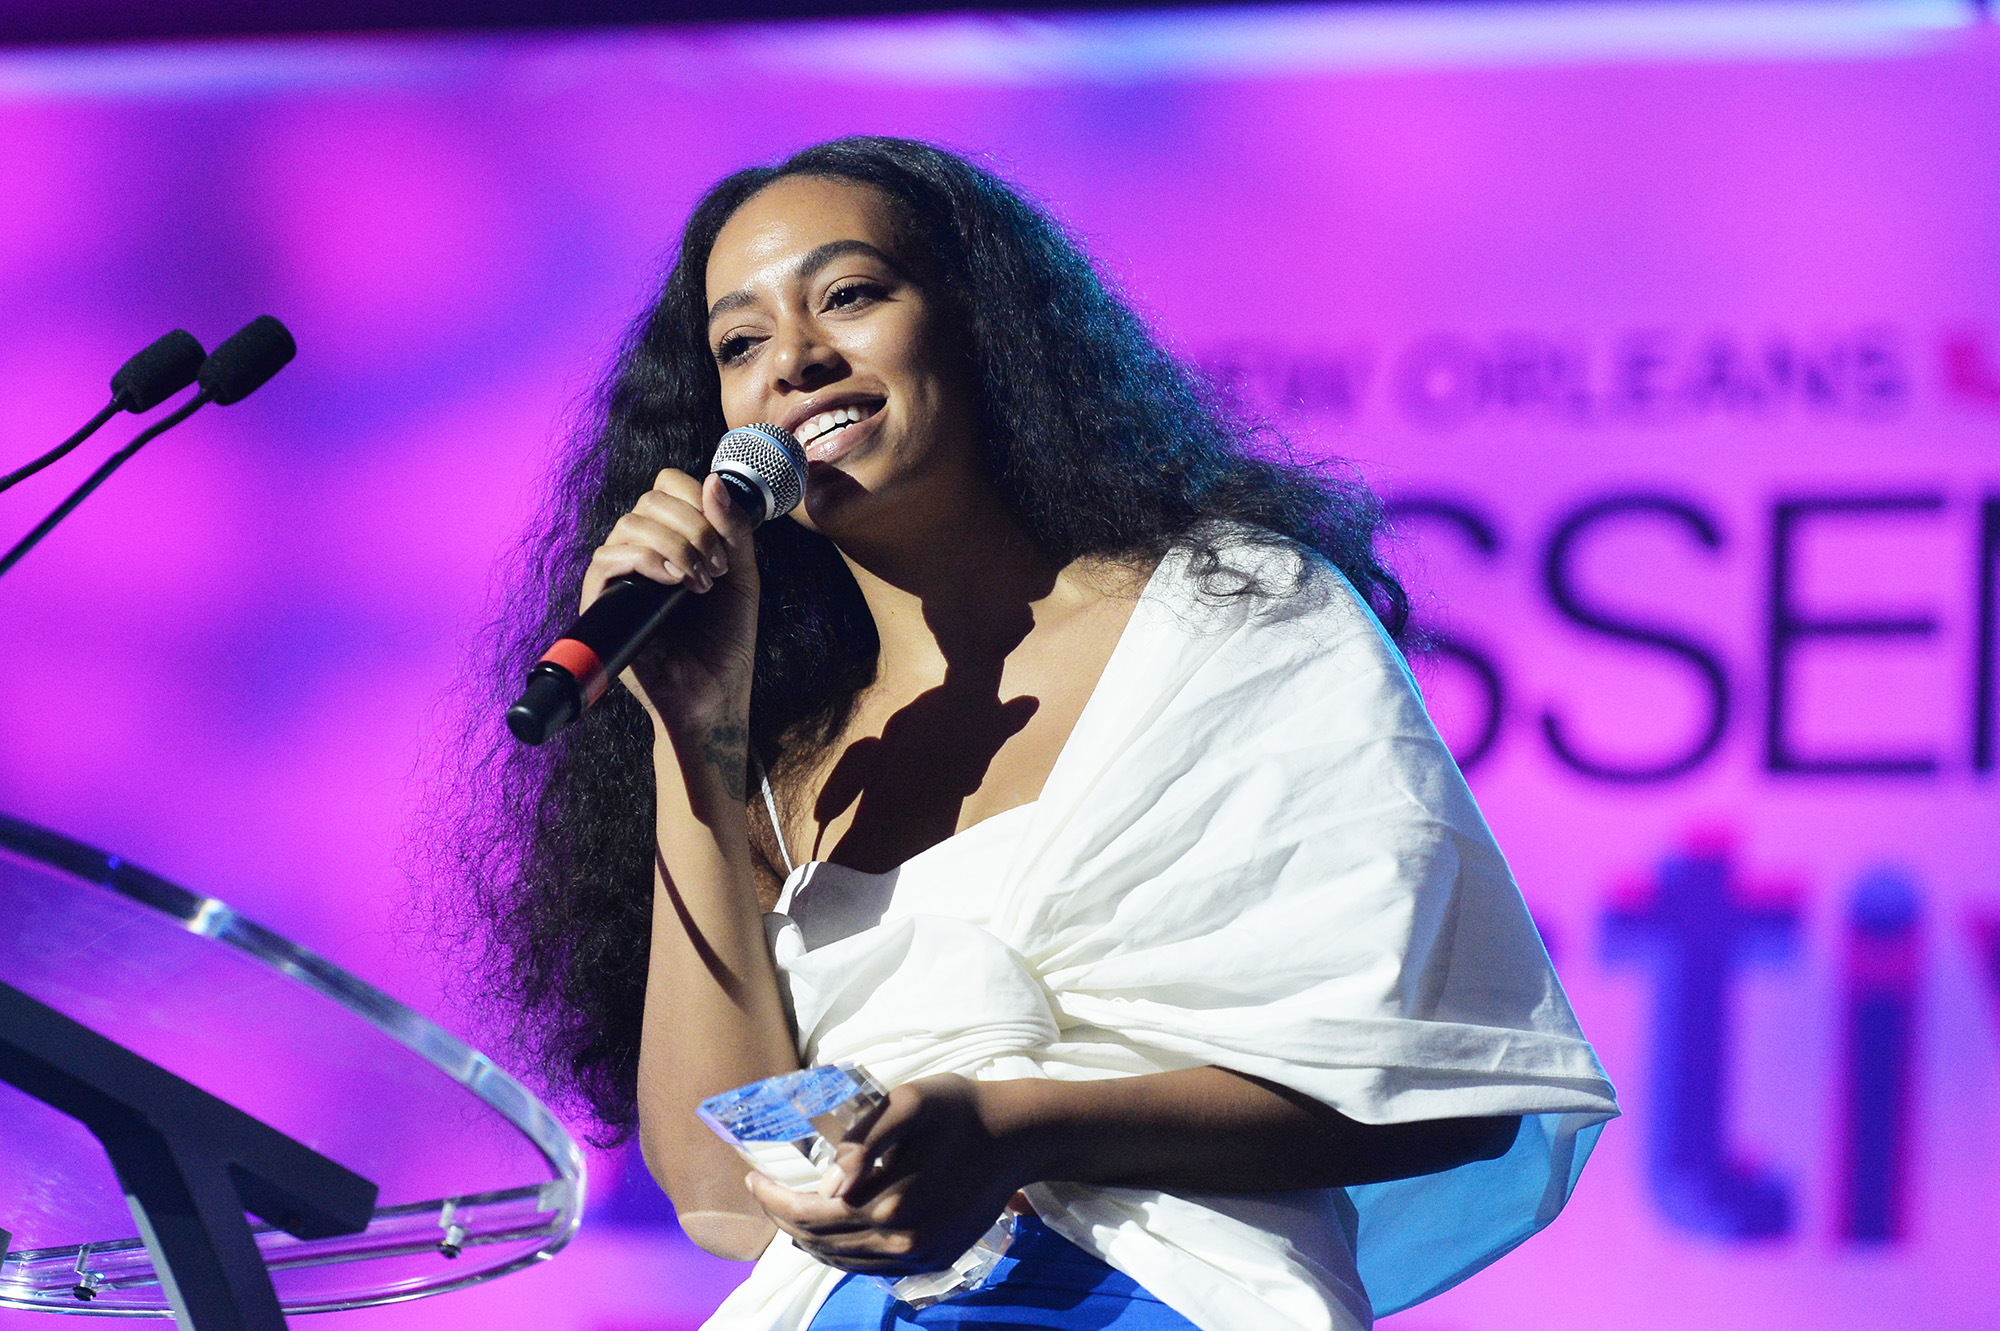 Solange Knowles speaks onstage at the 2016 ESSENCE Festival Presented By Coca-Cola at Ernest N. Morial Convention Center on July 3, 2016 in New Orleans, Louisiana. (Photo by Paras Griffin/Getty Images for 2016 Essence Festival) (Paras Griffin—Getty Images for 2016 Essence Fe)